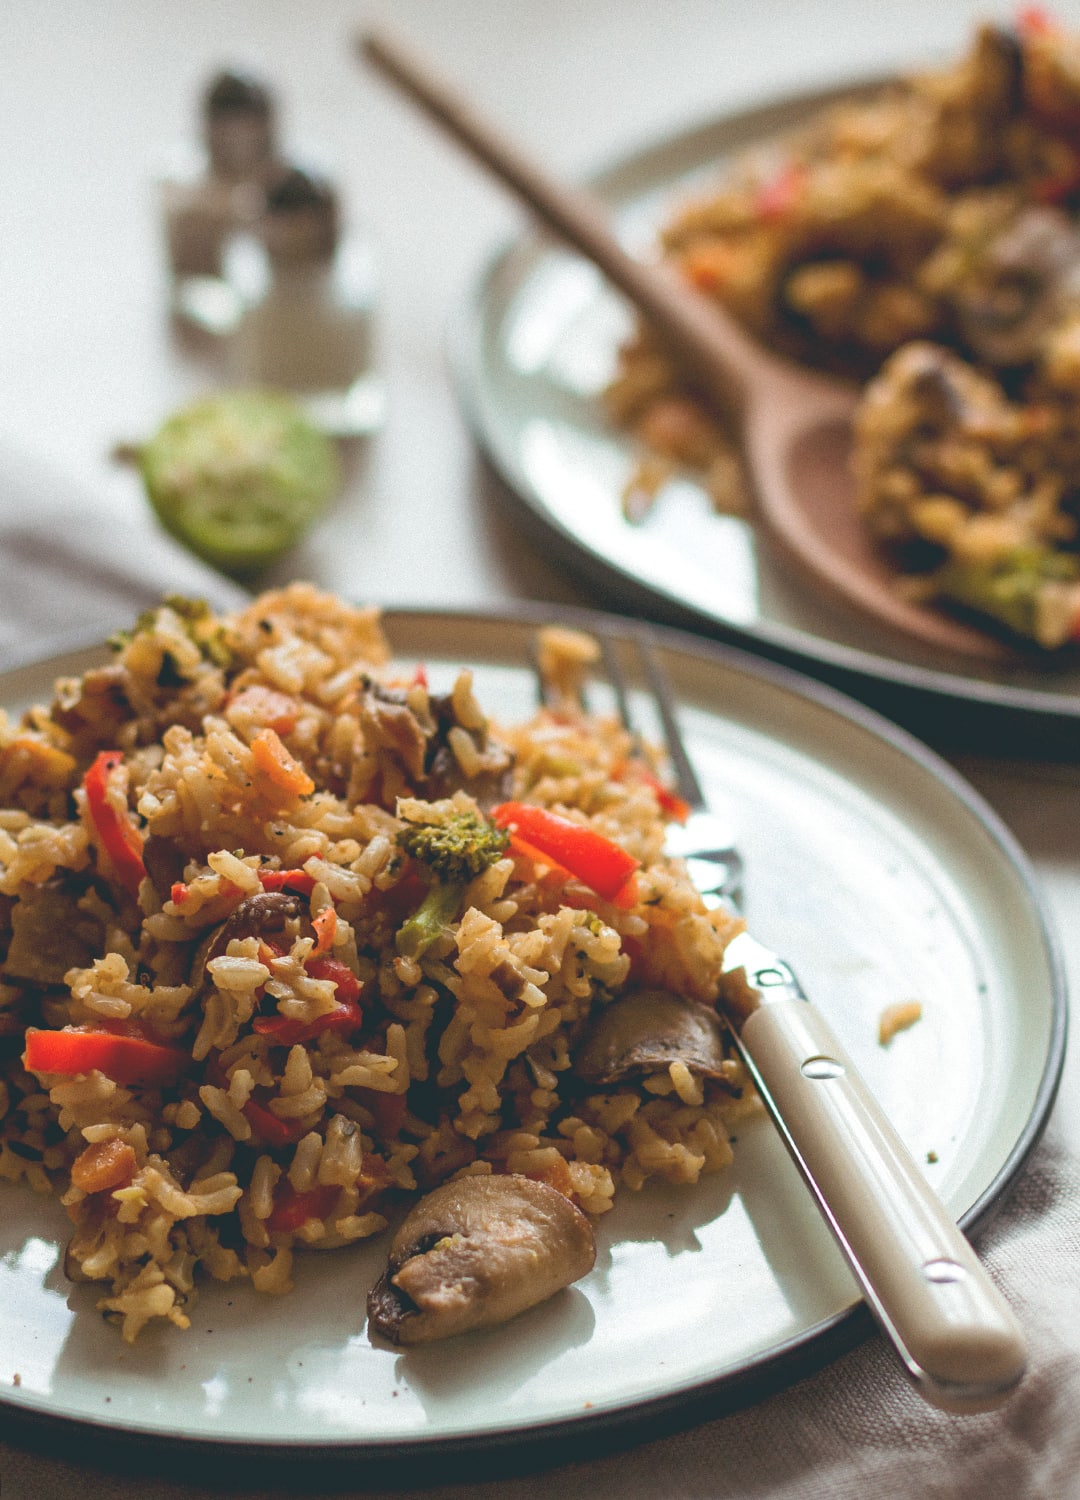 Loaded Veggie Fried Rice - the most comforting, filling, hearty recipe. Made with brown rice, mushrooms, veggies, spices, and tamari almond butter dressing. (vegan, GF) | thehealthfulideas.com